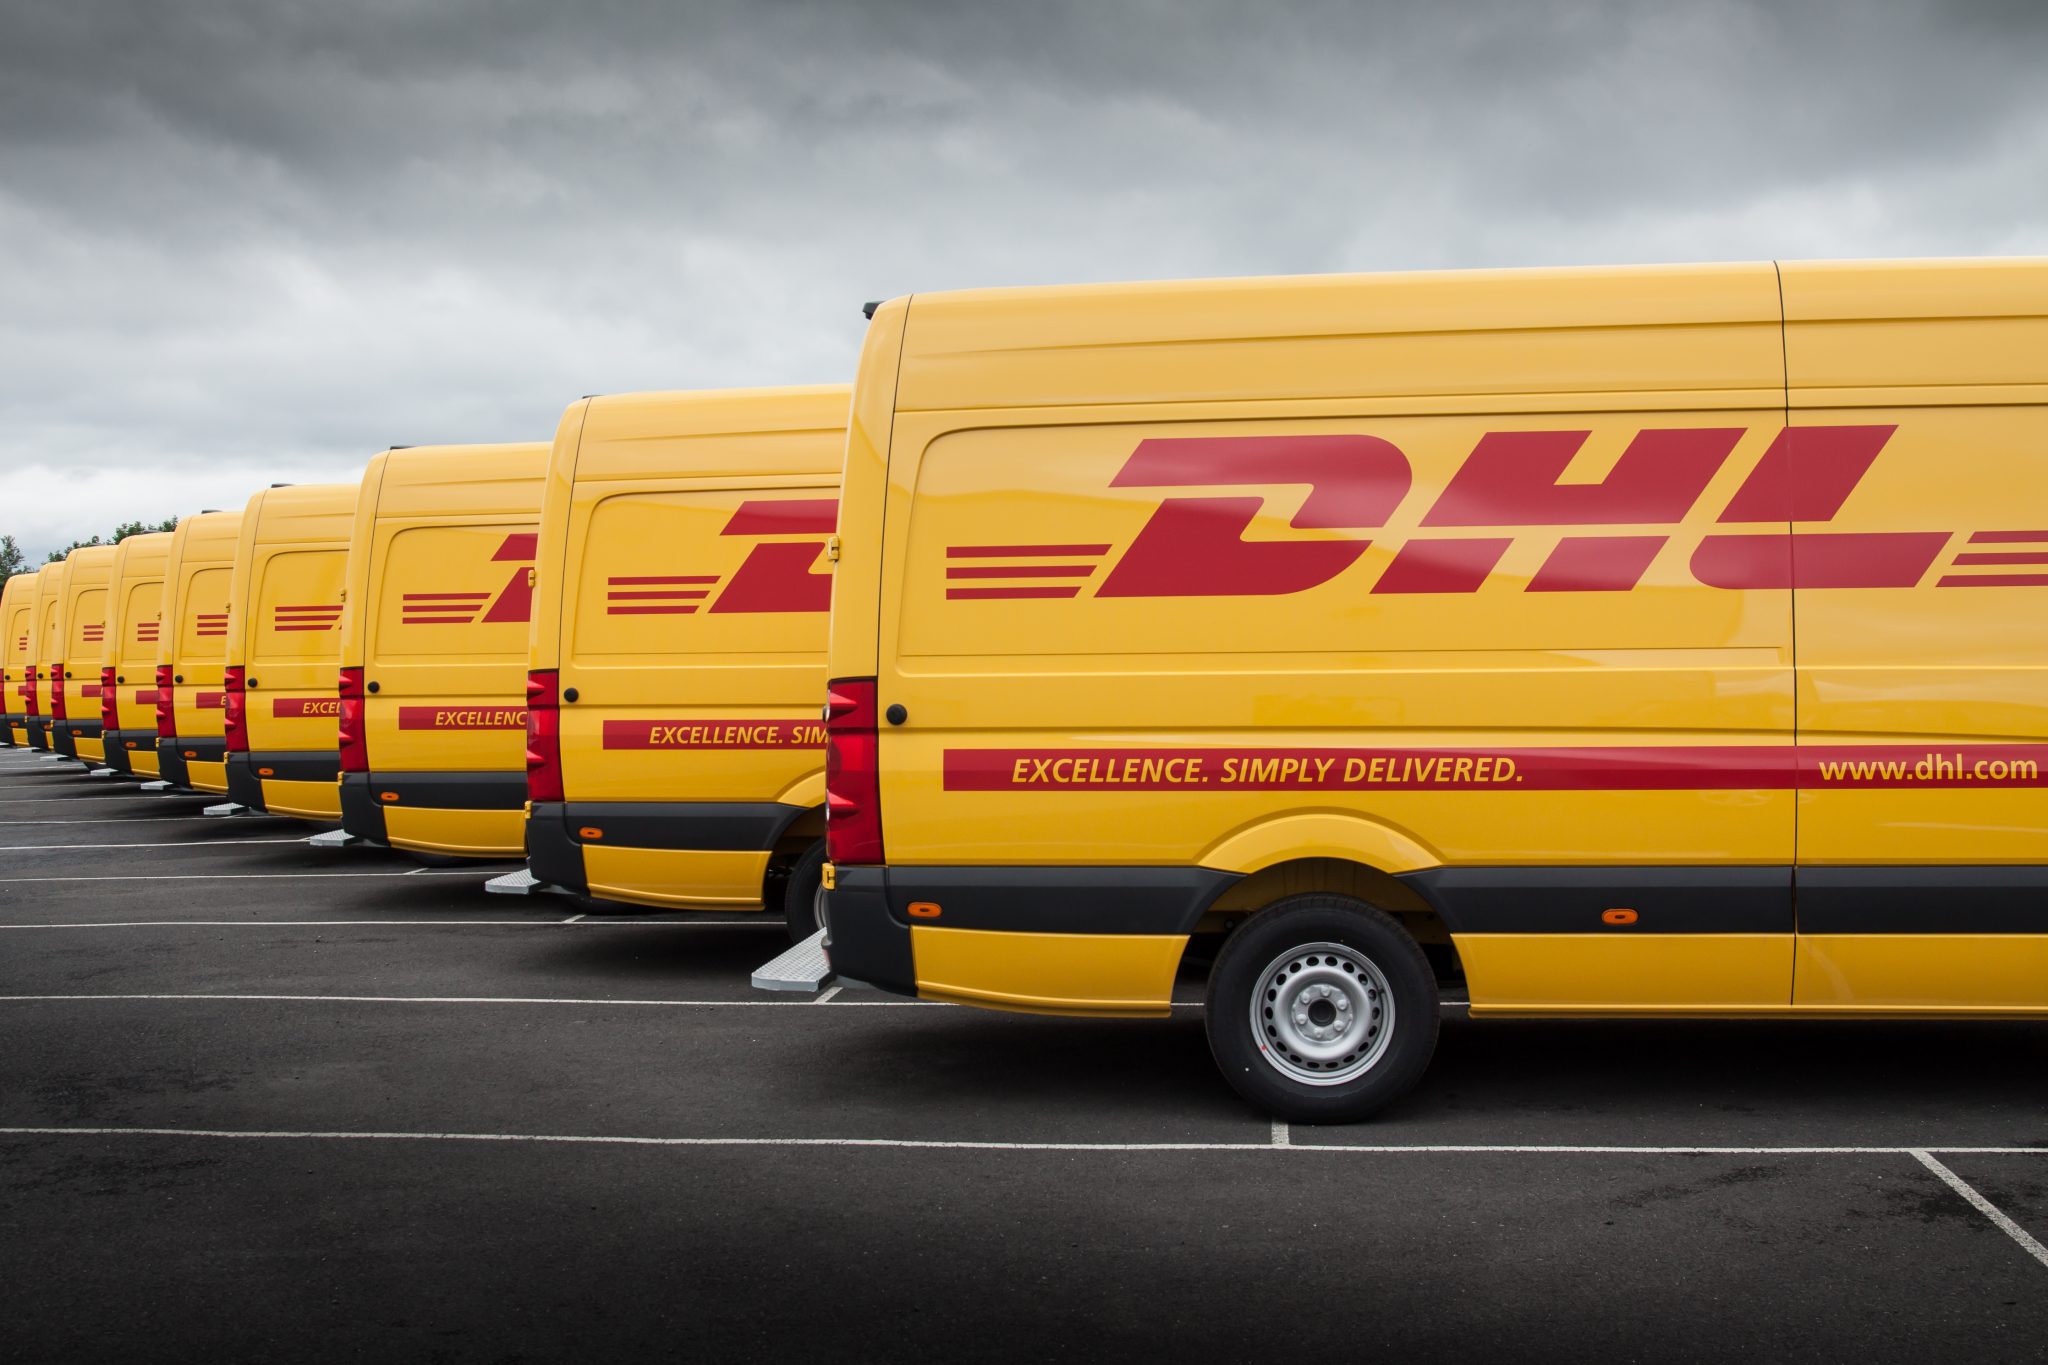 African businesses should embrace cross-border e-commerce, says DHL